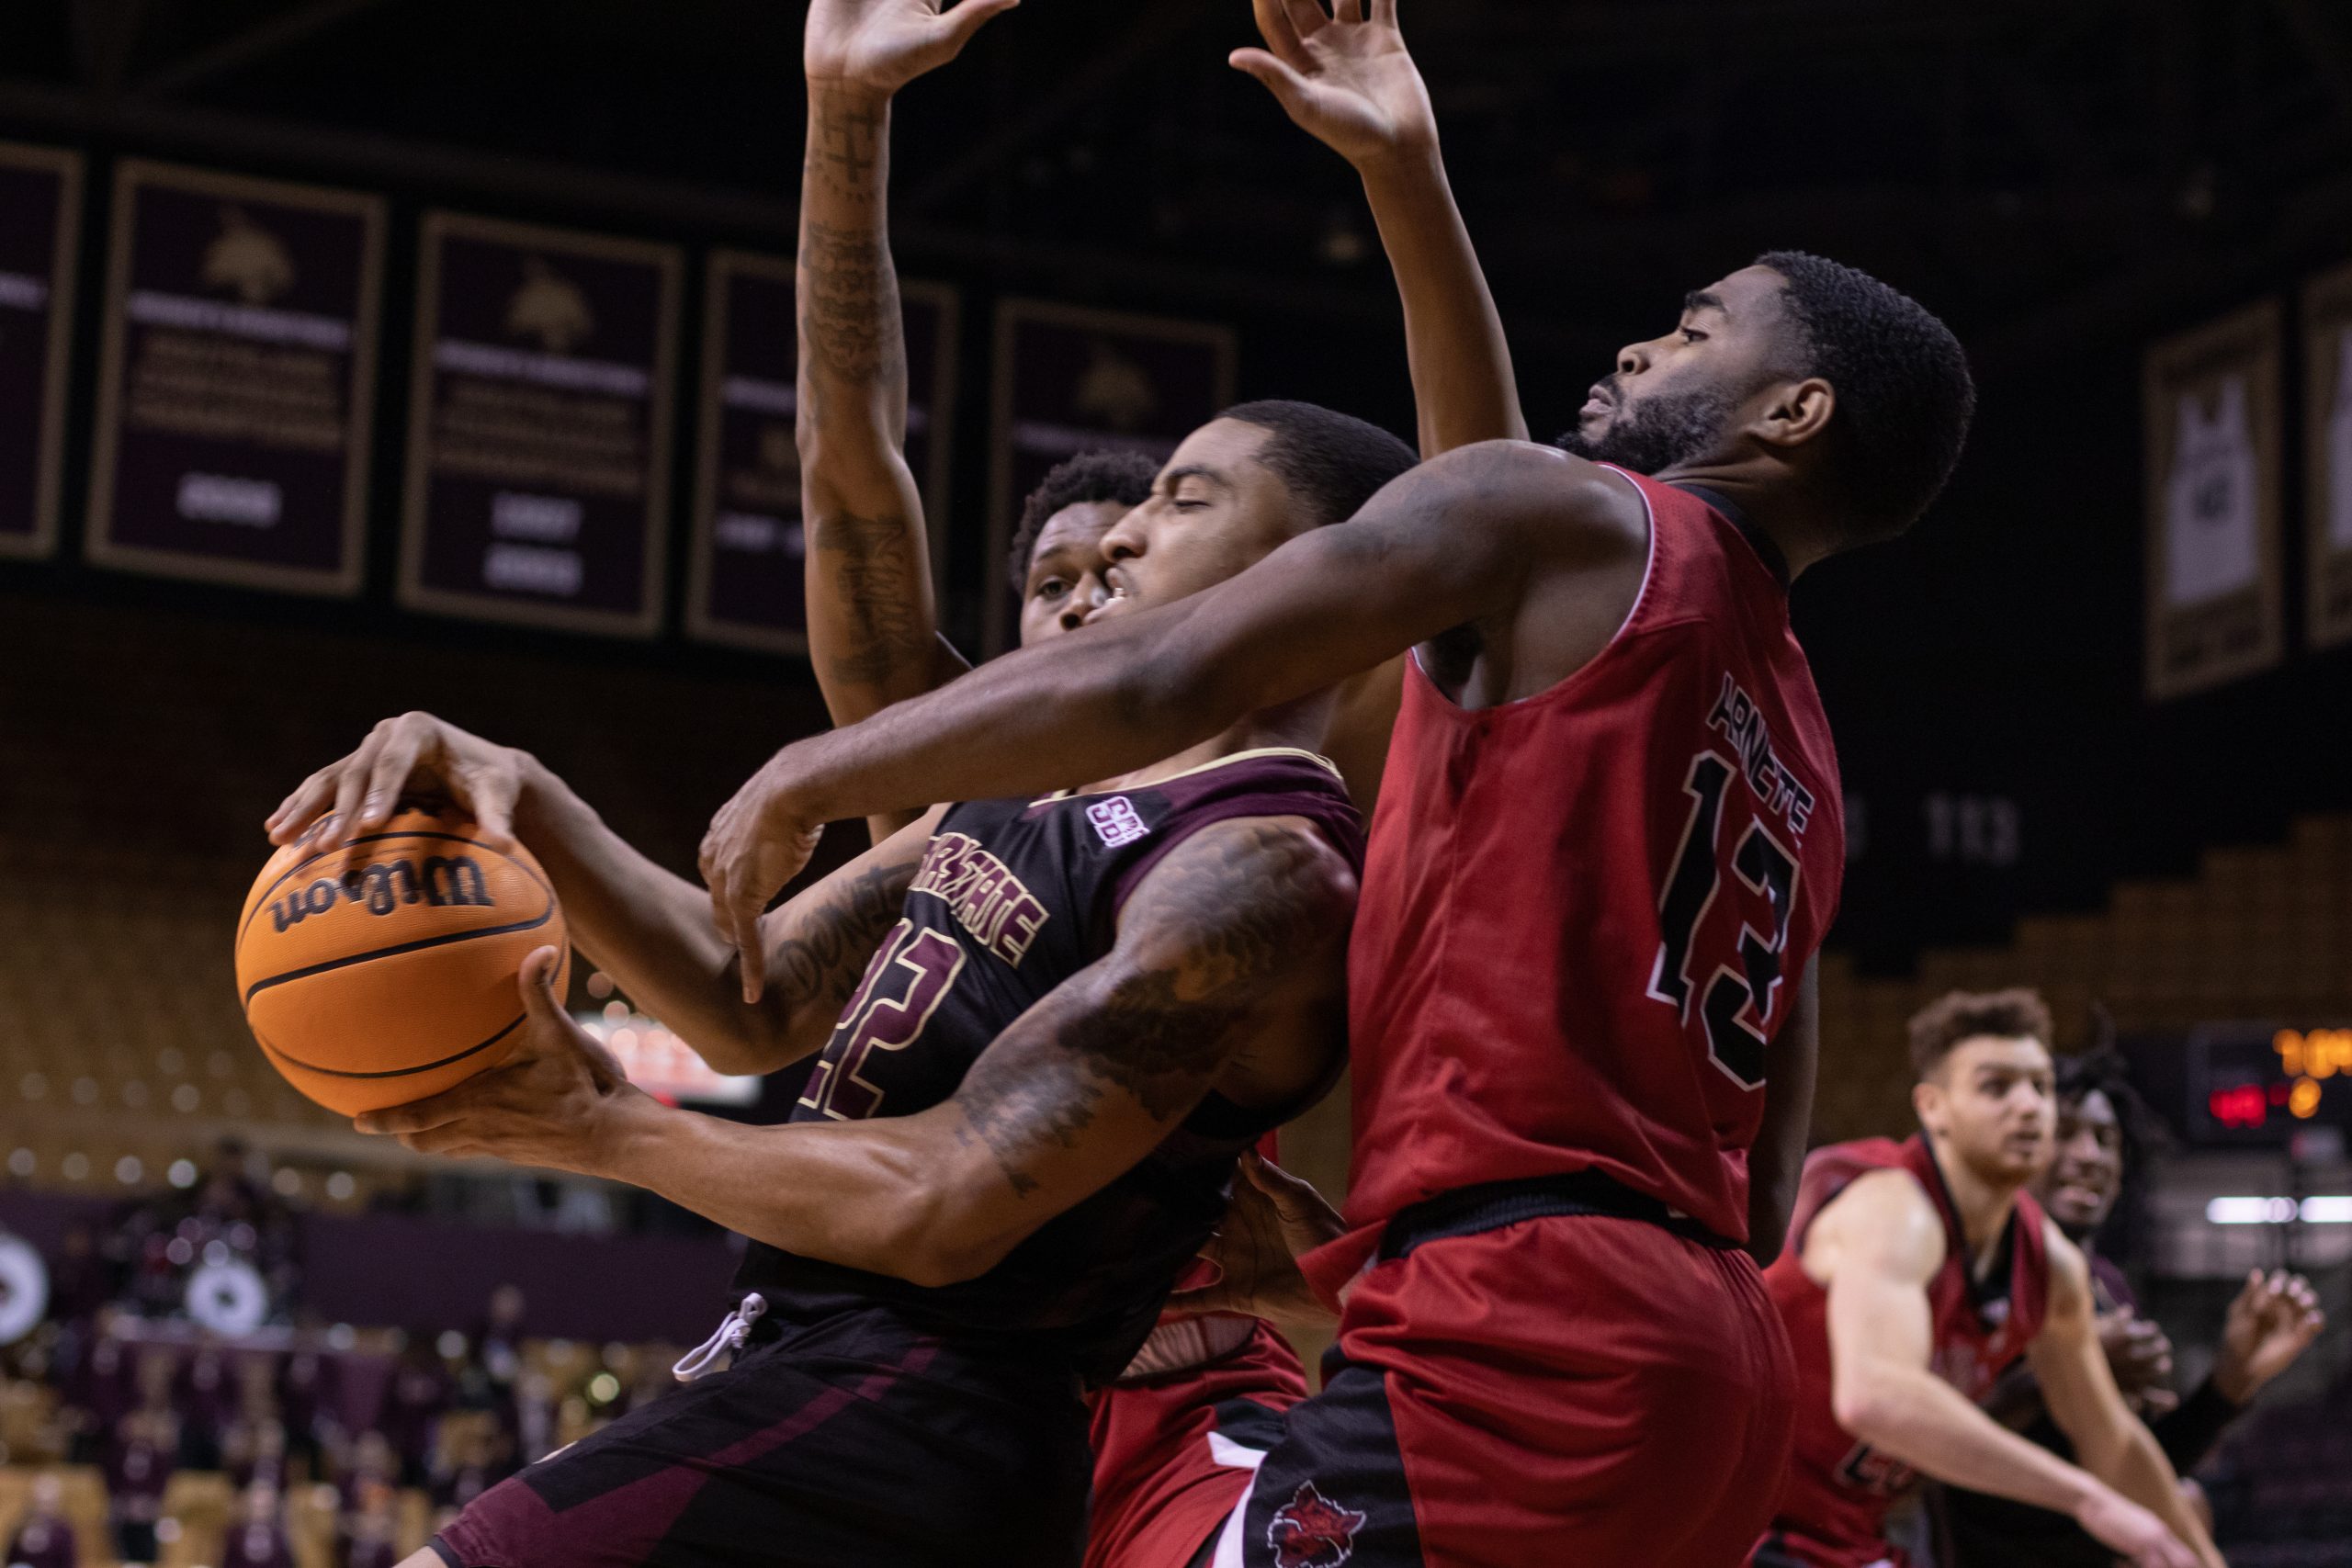 Mens+Basketball+against+Arkansas+State+University%3A+A+Photo+Gallery